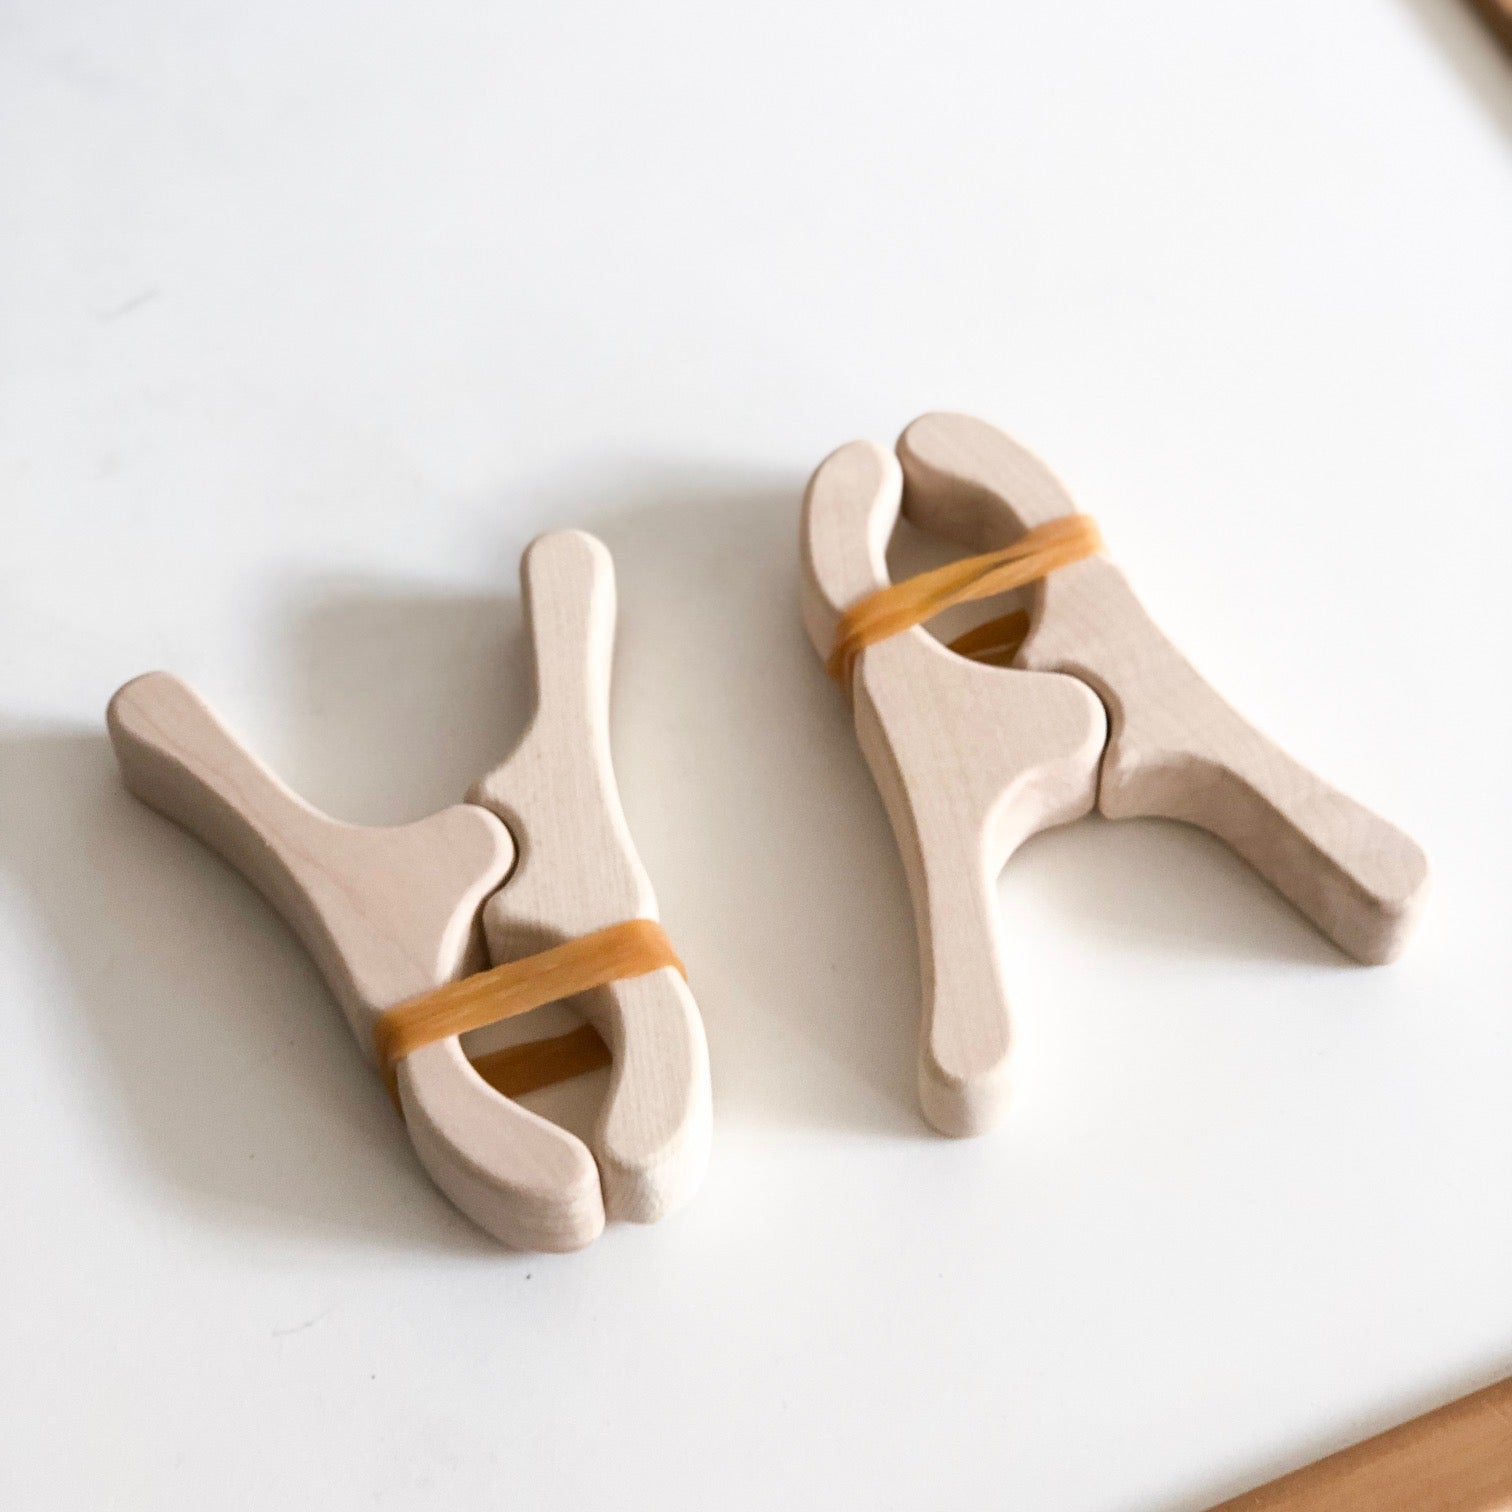 Wooden Play Clips - Oh Happy Fry - we ship worldwide